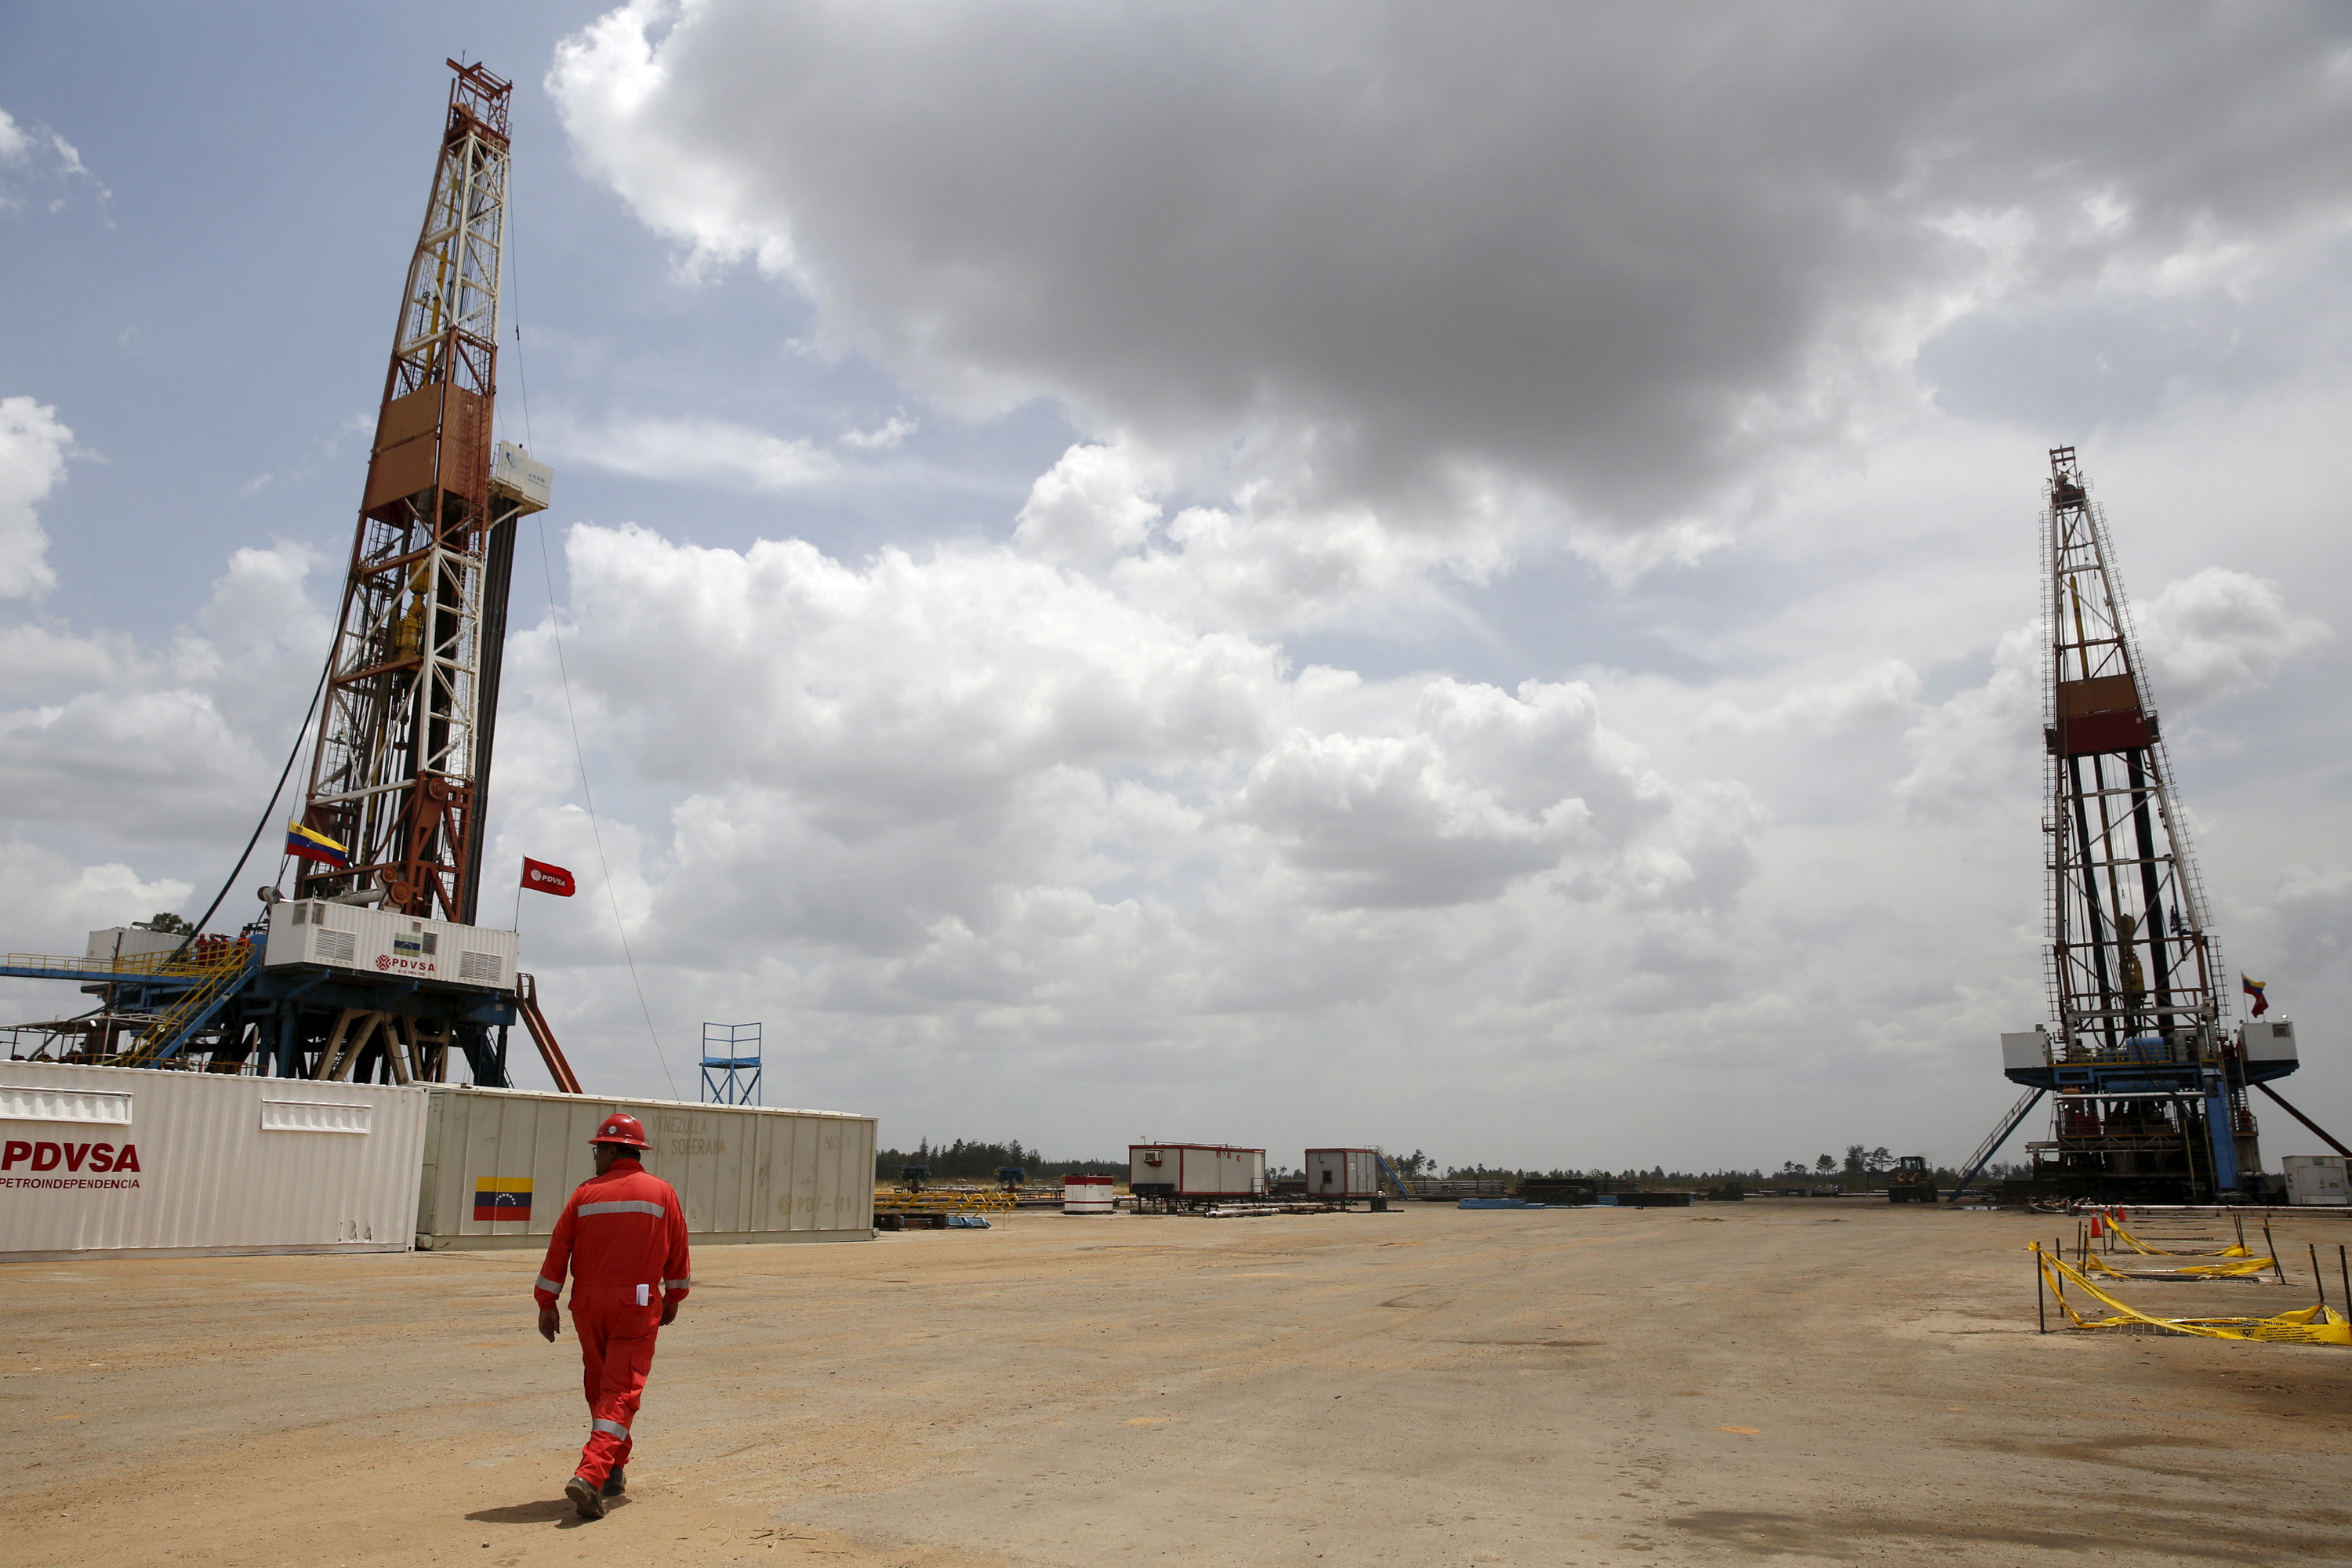 An oilfield worker walks next to drilling rigs at an oil well operated by Venezuela's state oil company PDVSA, in the oil rich Orinoco belt, near Morichal at the state of Monagas